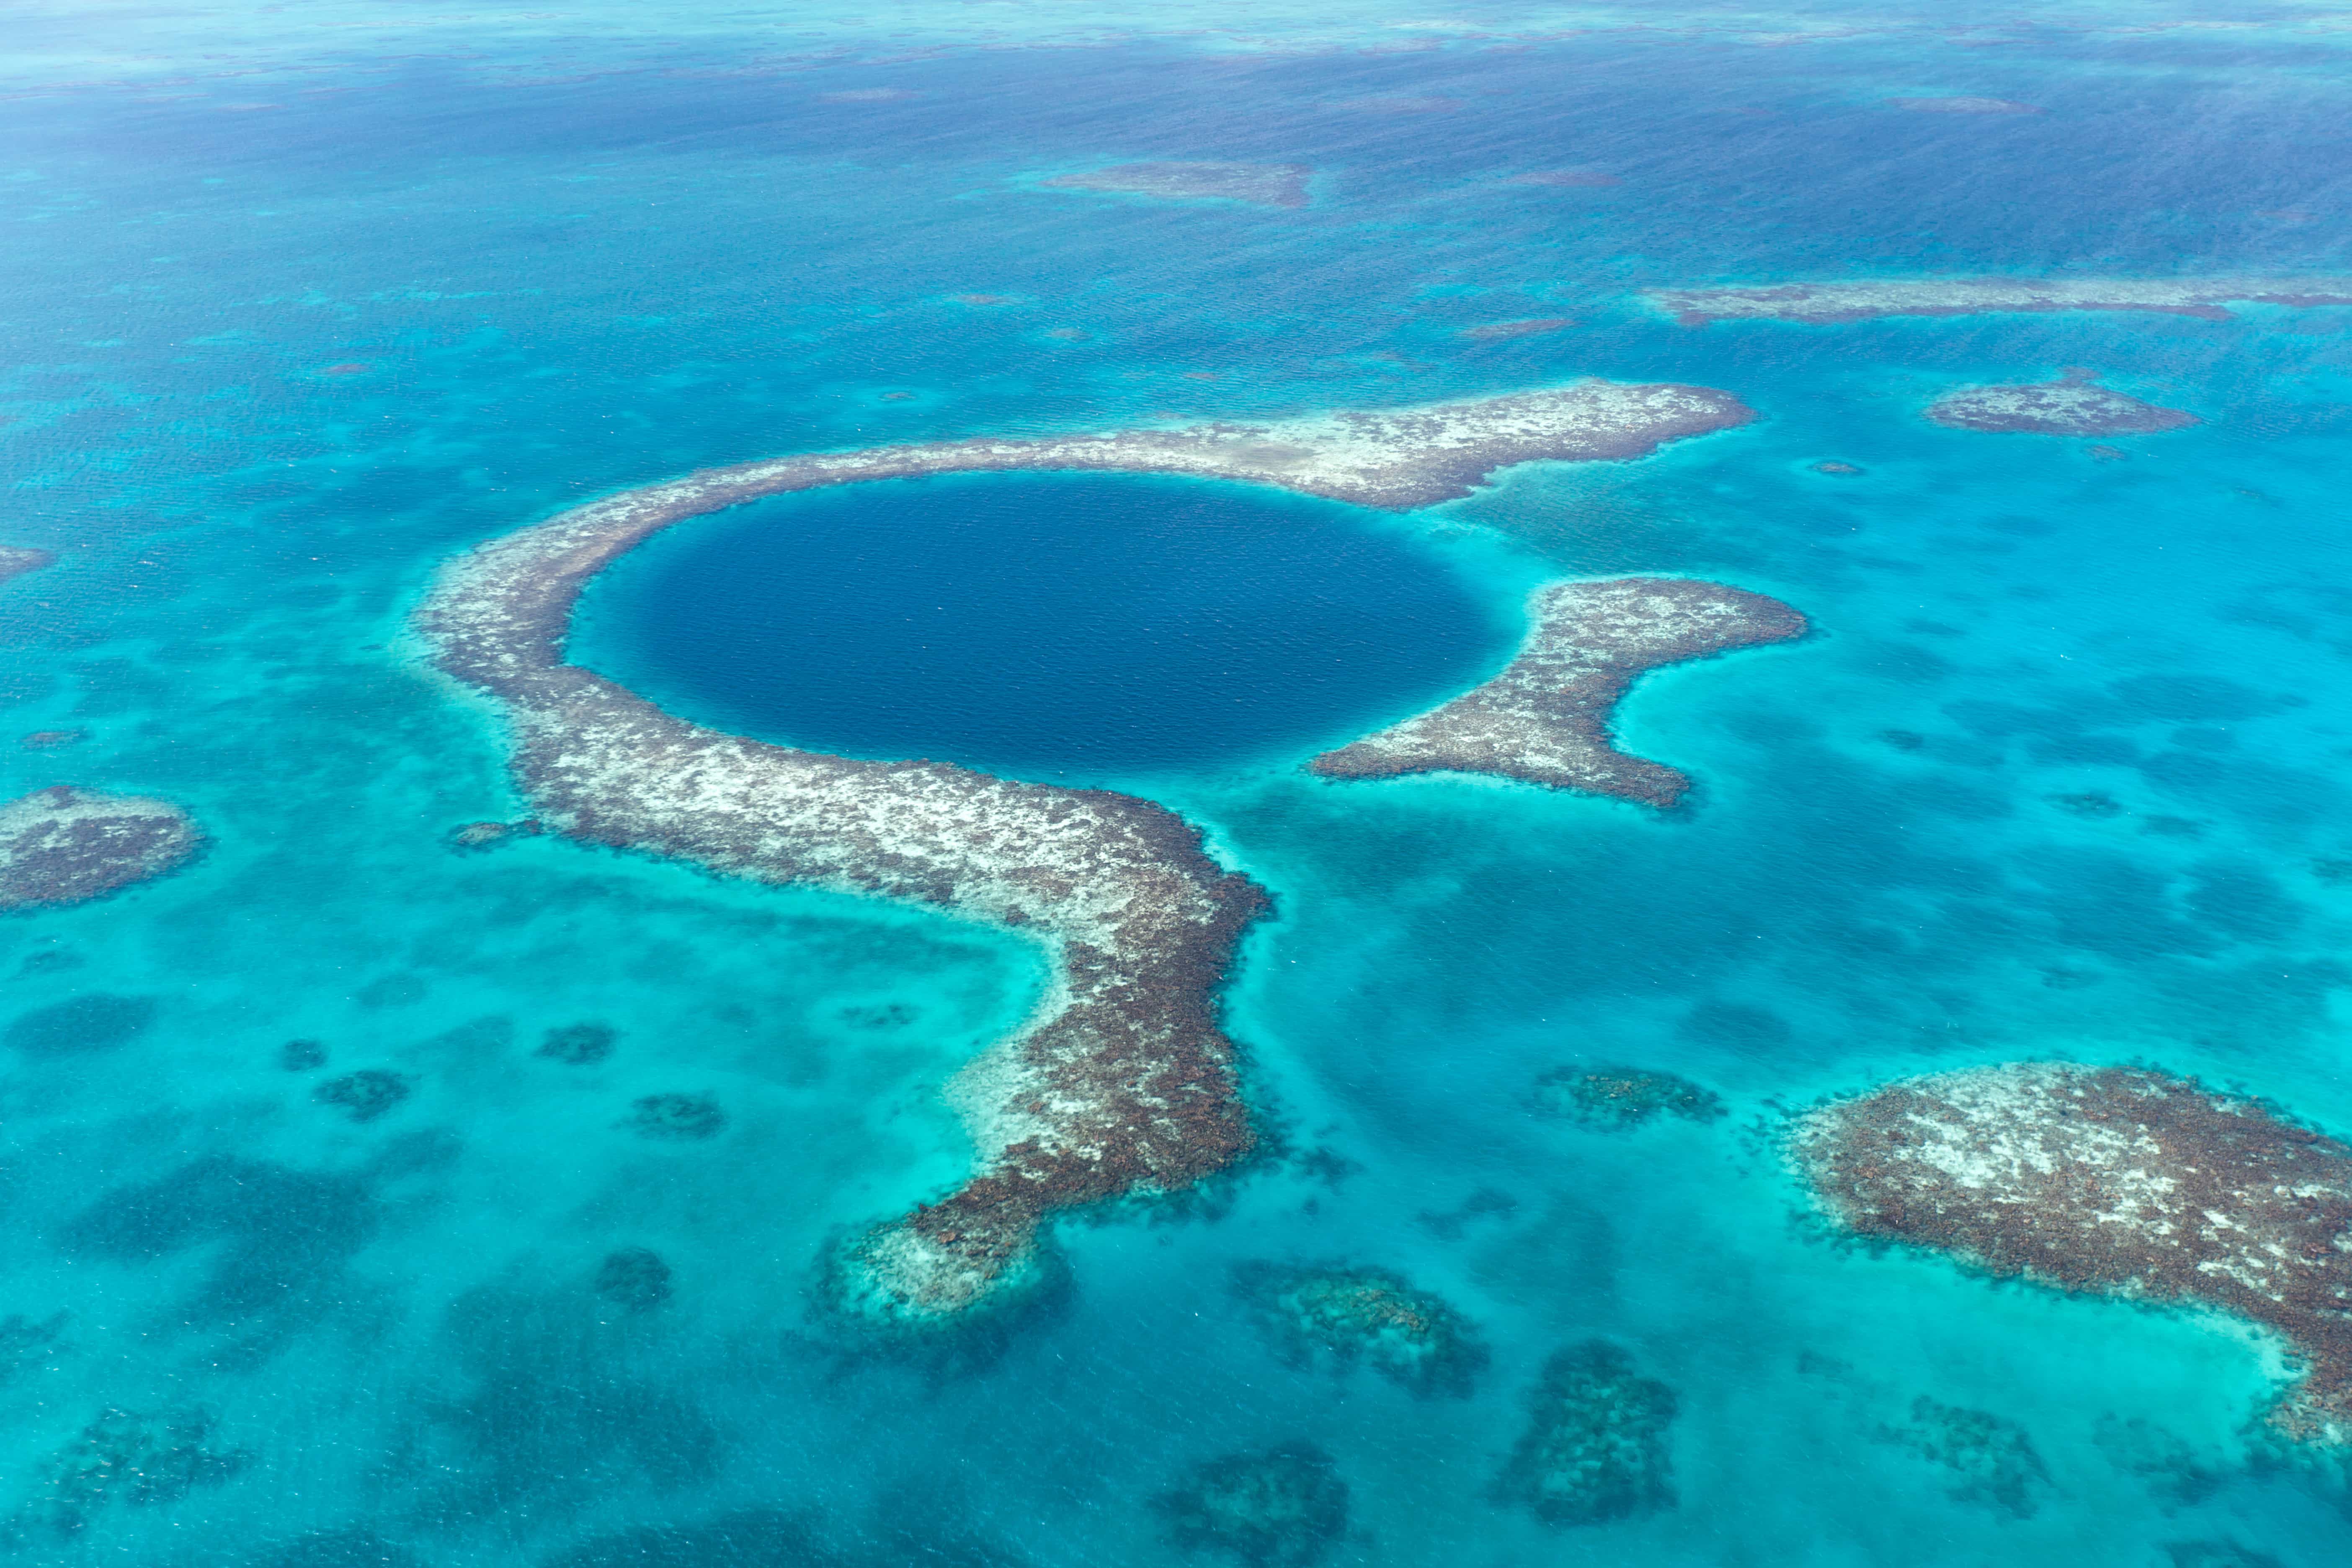 aerial shot of the Blue Hole diving site in Belize